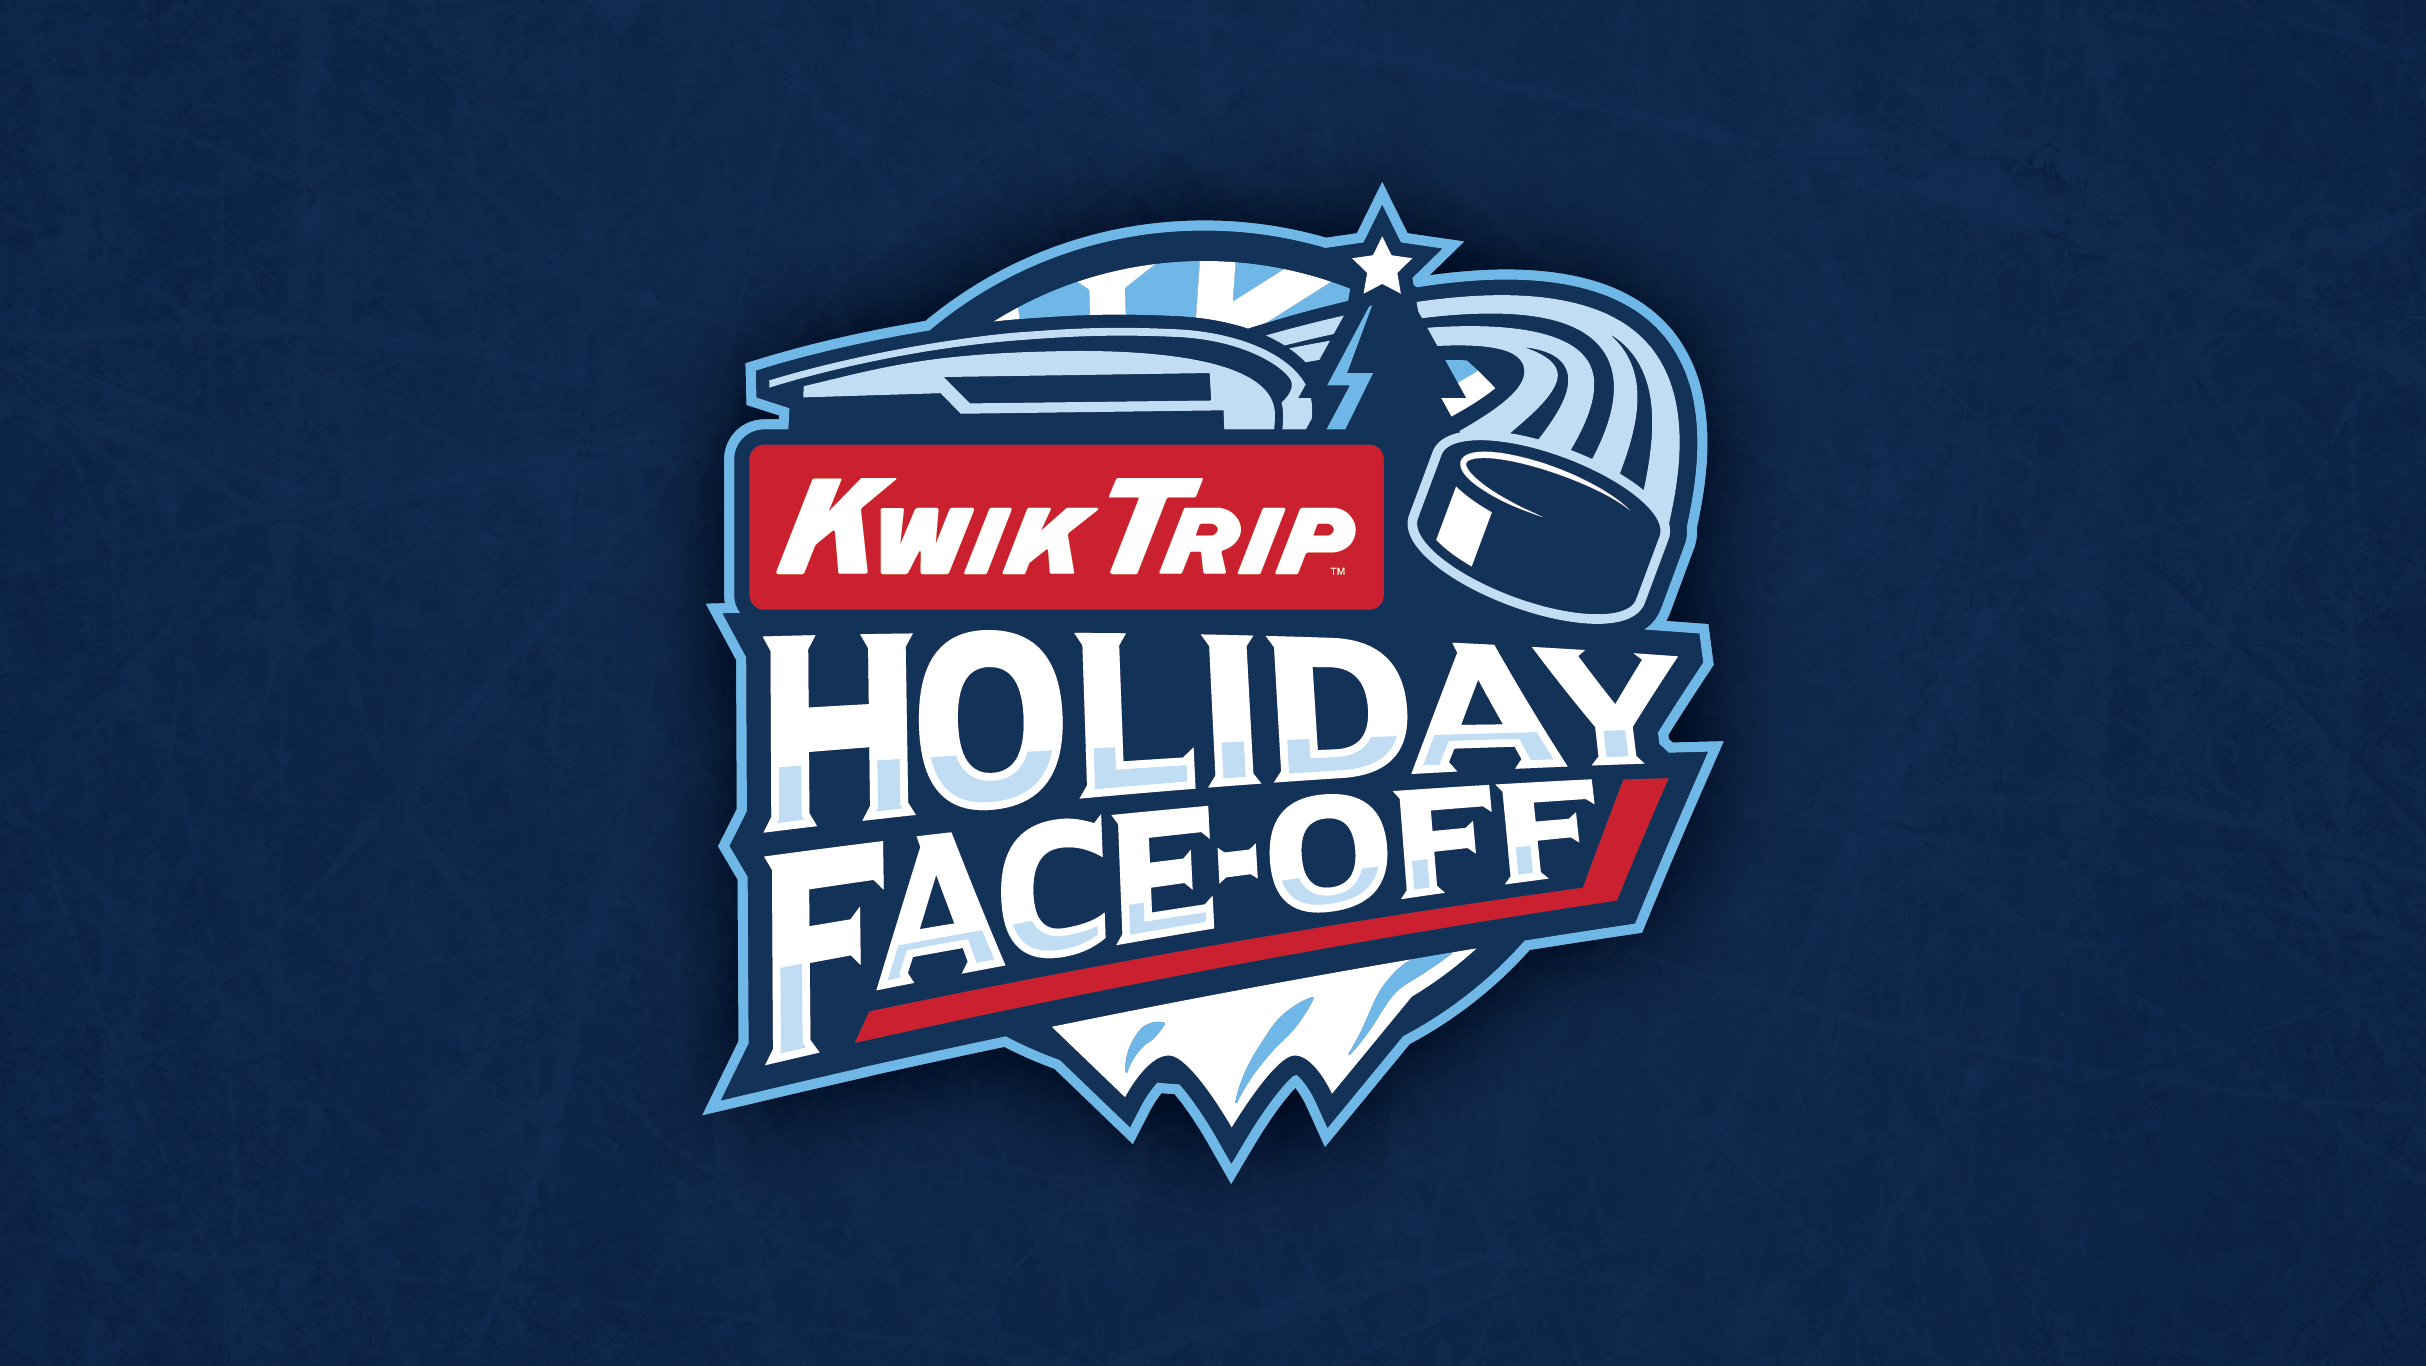 Kwik Trip Holiday Face-Off presales in Milwaukee